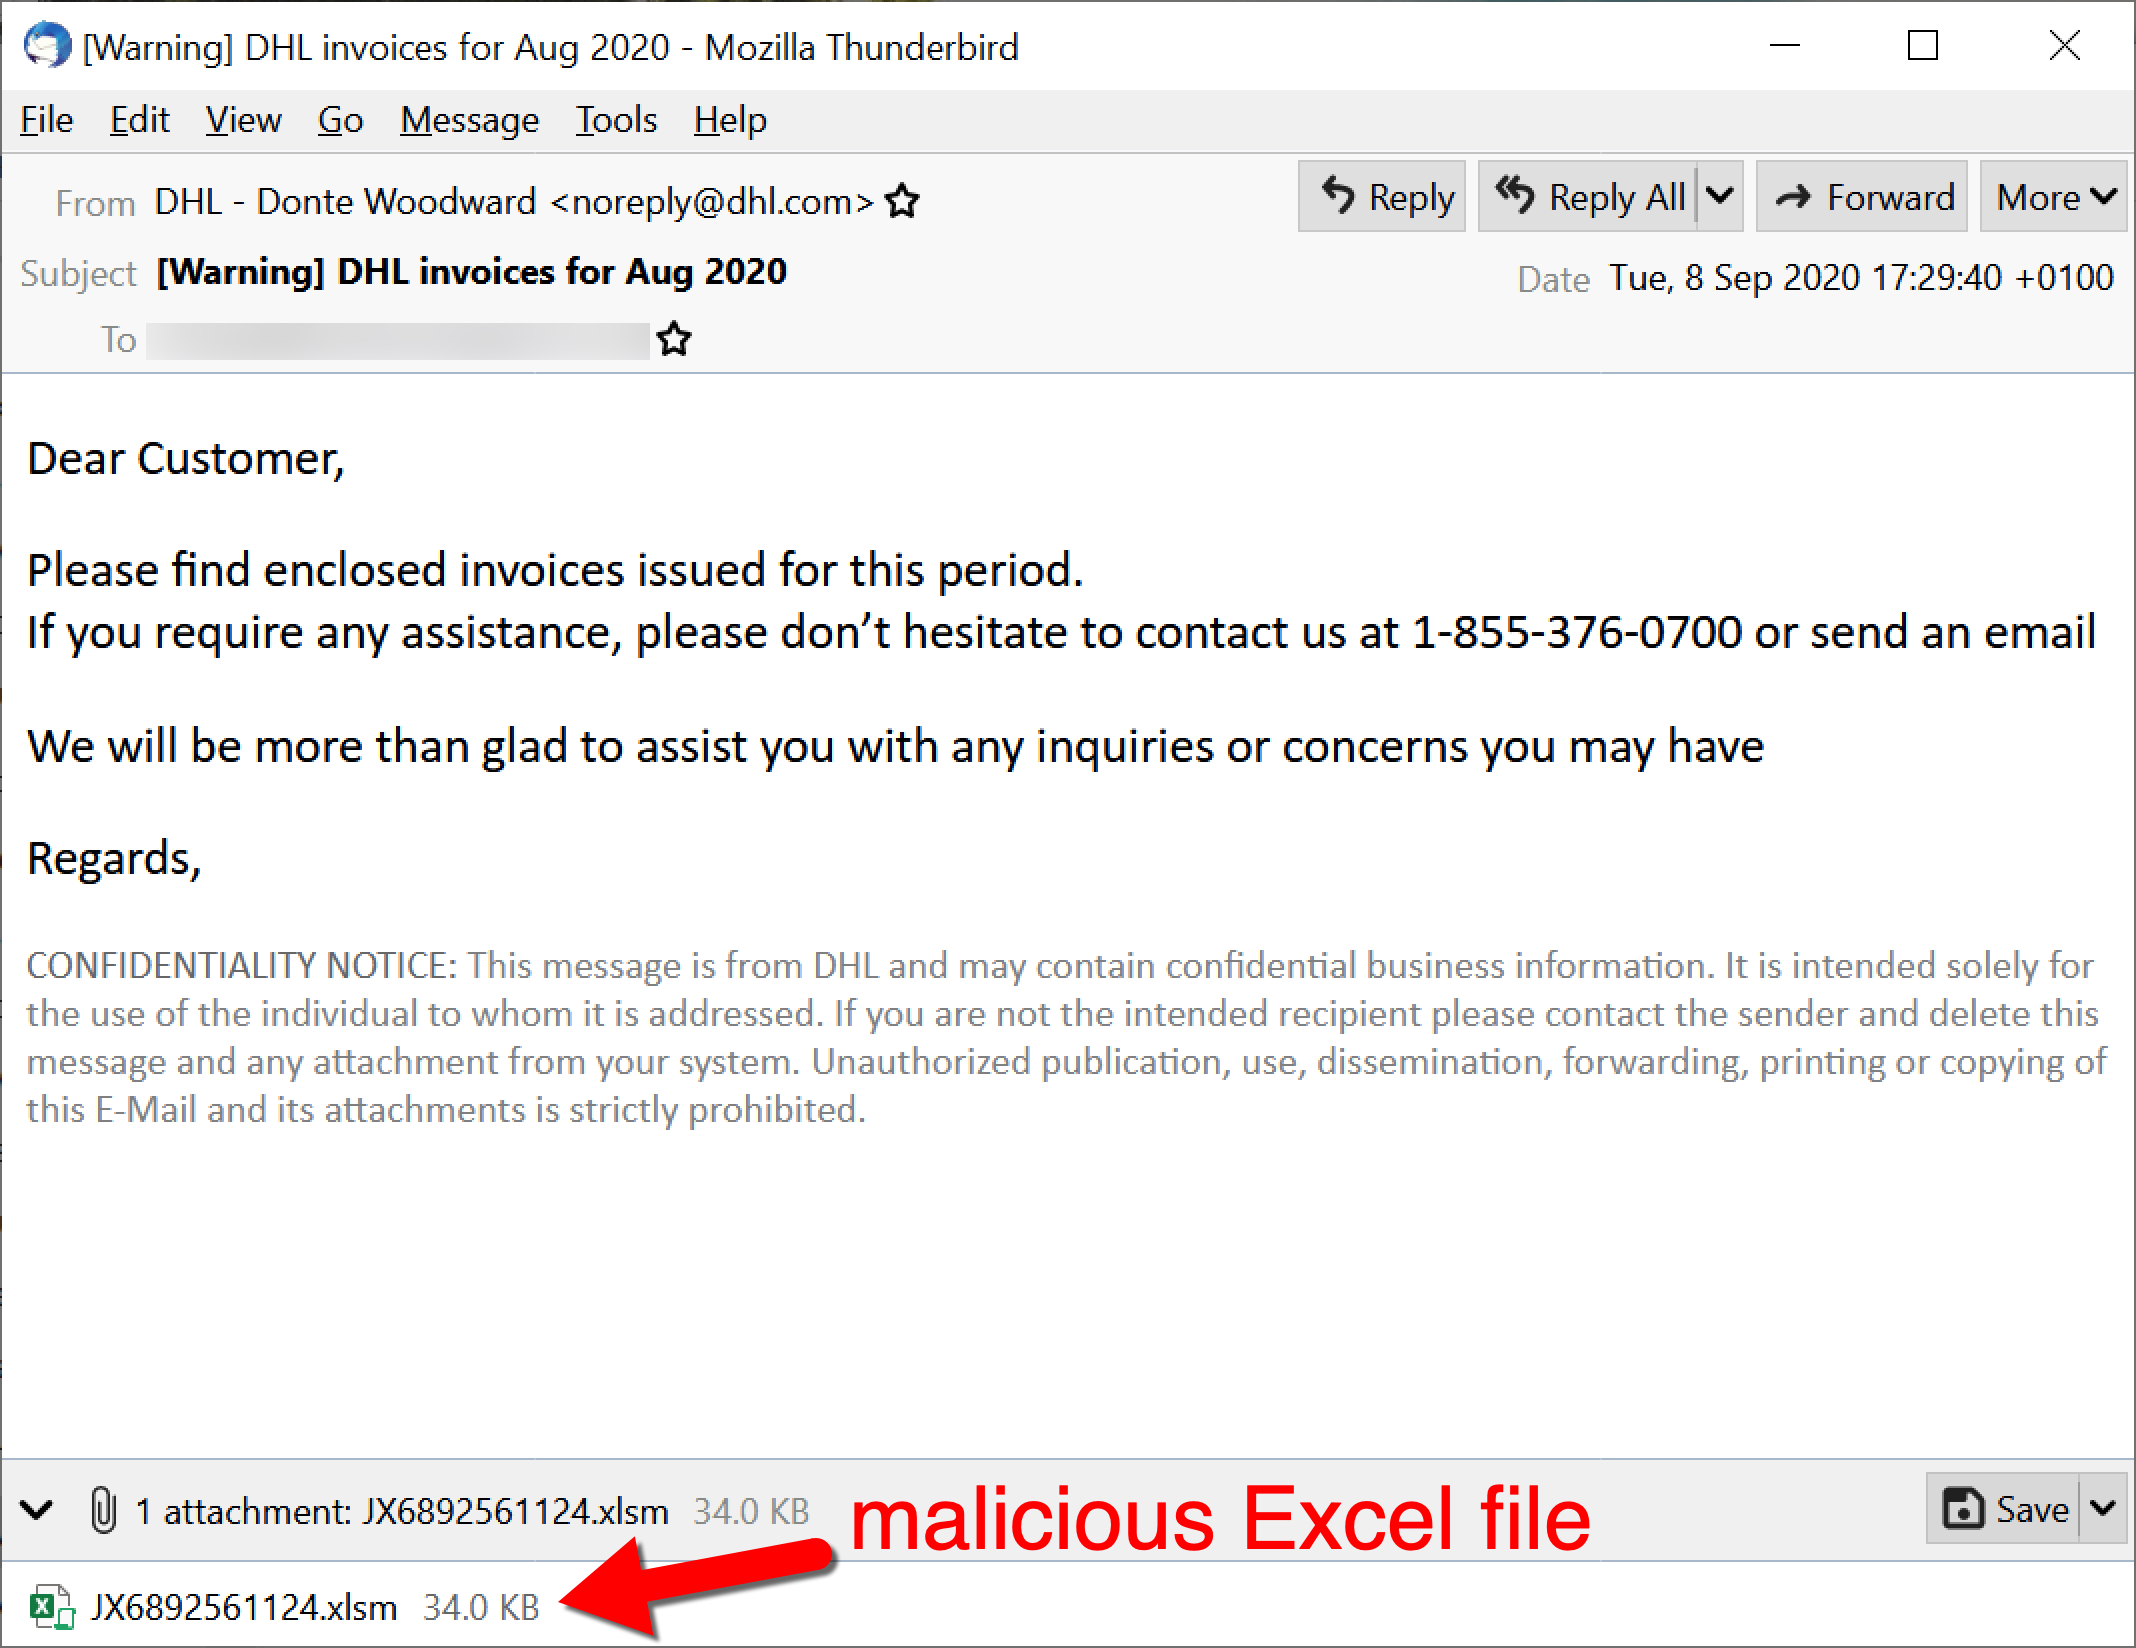 An email carrying a malicious Excel file, pushing Dridex, with the subject line "DHL Invoices for Aug 2020"